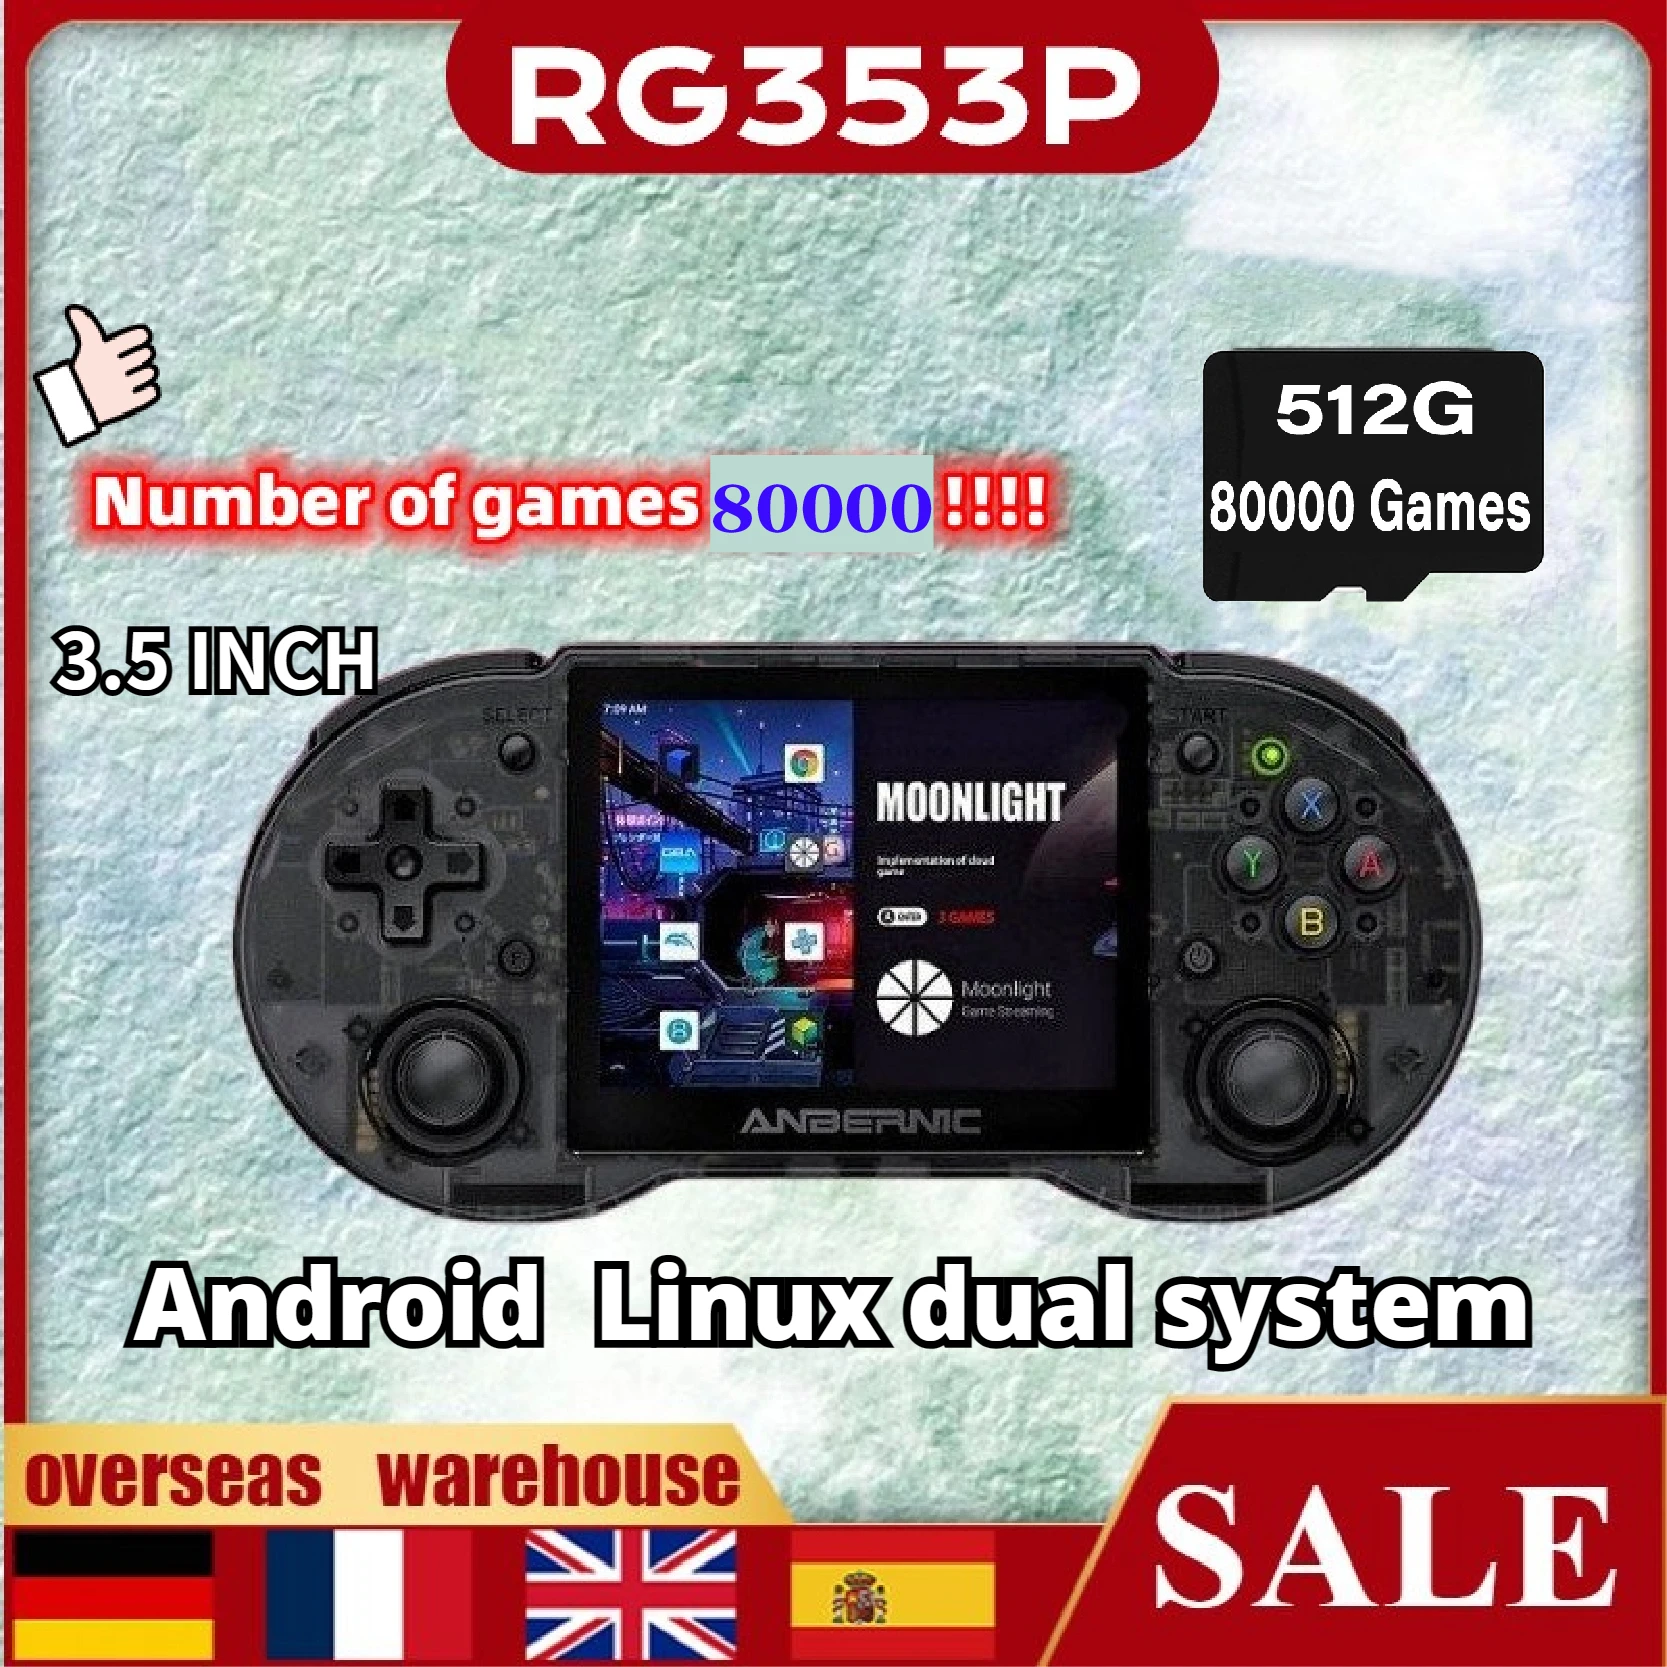 

512G ANBERNIC RG353P New Original Handheld Game Console Android Linux Dual System HDMI 3.5 Inch Multi-touch Screen 80000 Games